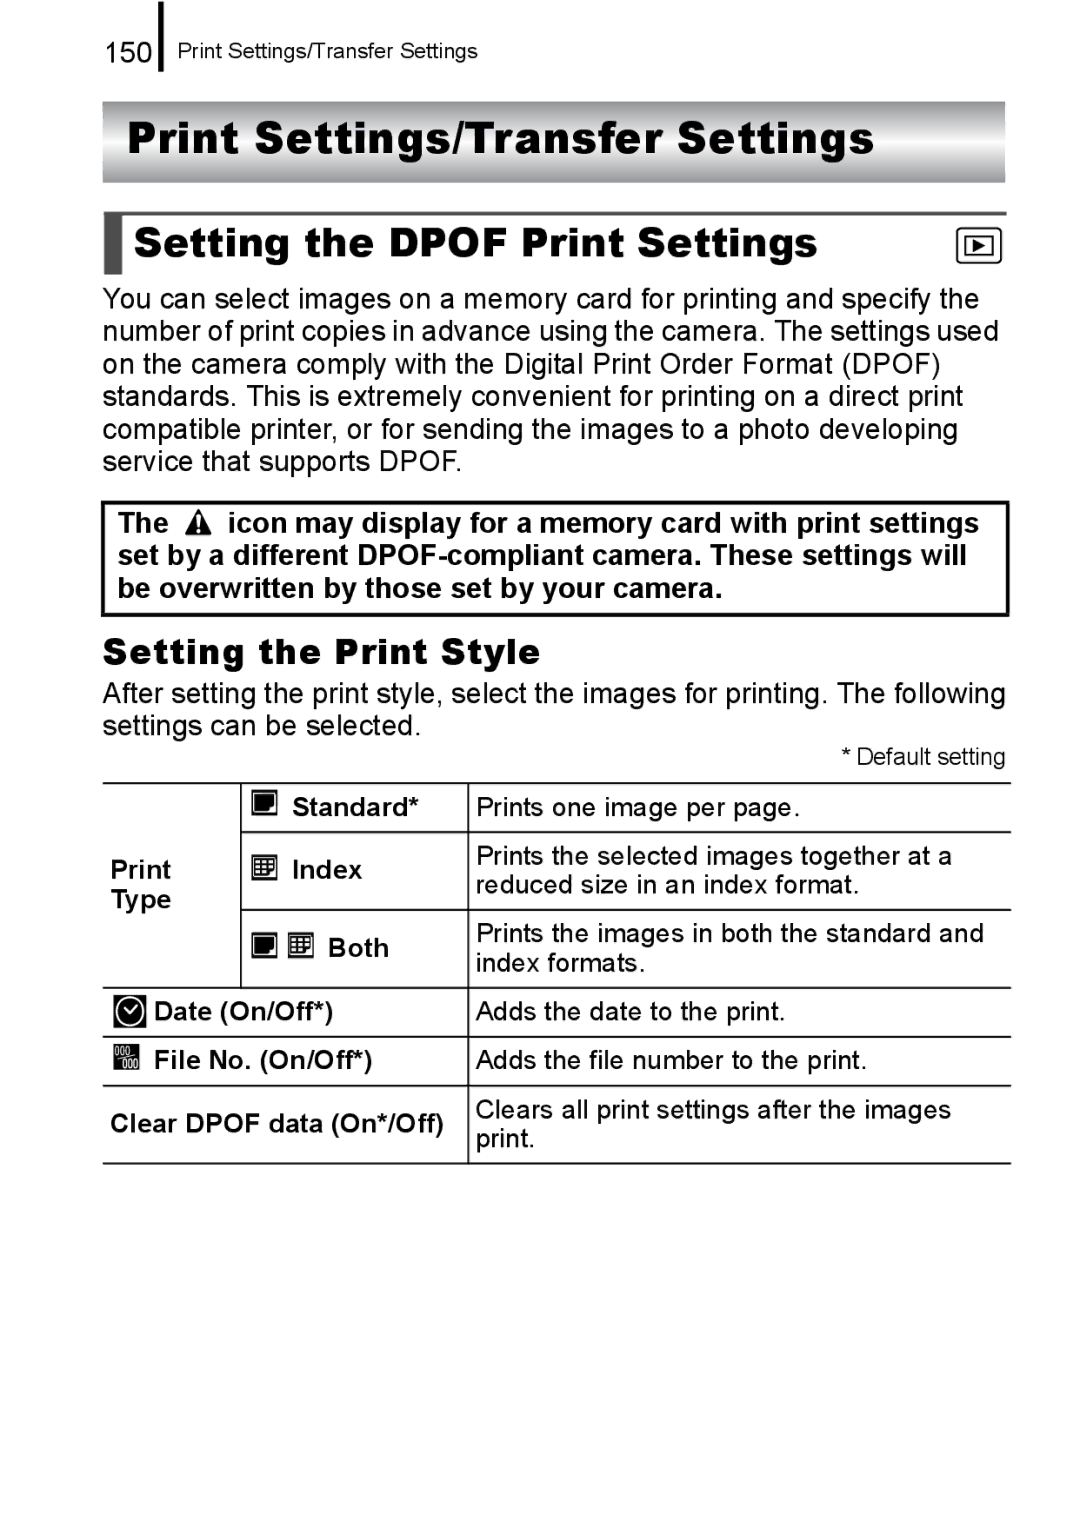 Canon A650 IS appendix Print Settings/Transfer Settings, Setting the Dpof Print Settings, Setting the Print Style, 150 